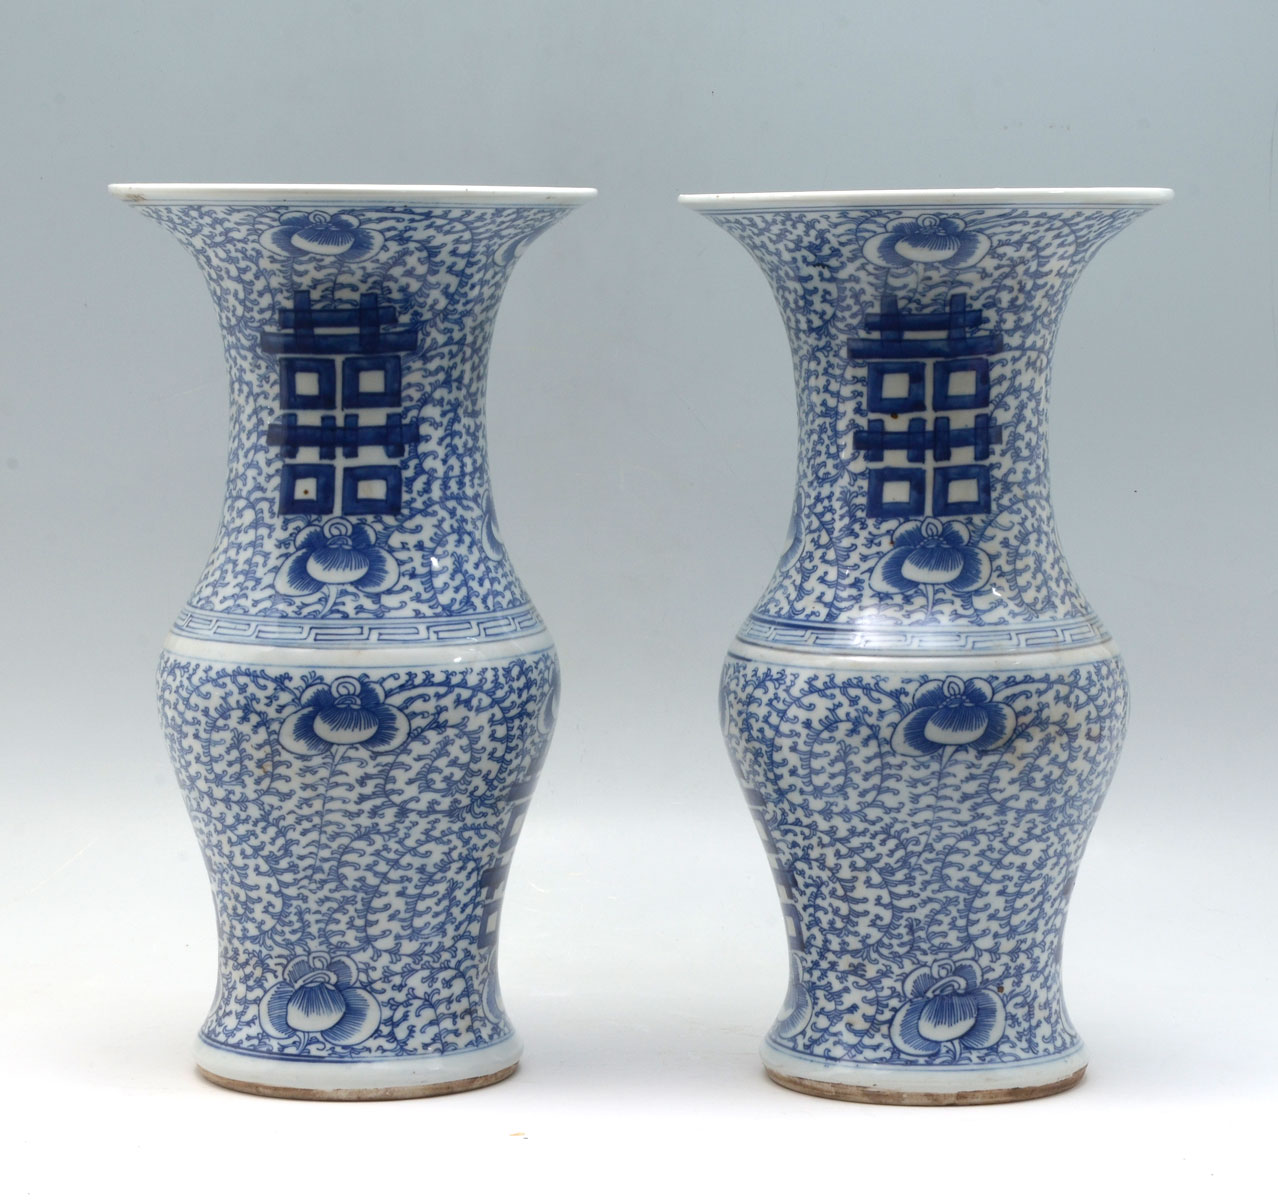 PAIR OF 19TH C. CHINESE BLUE &